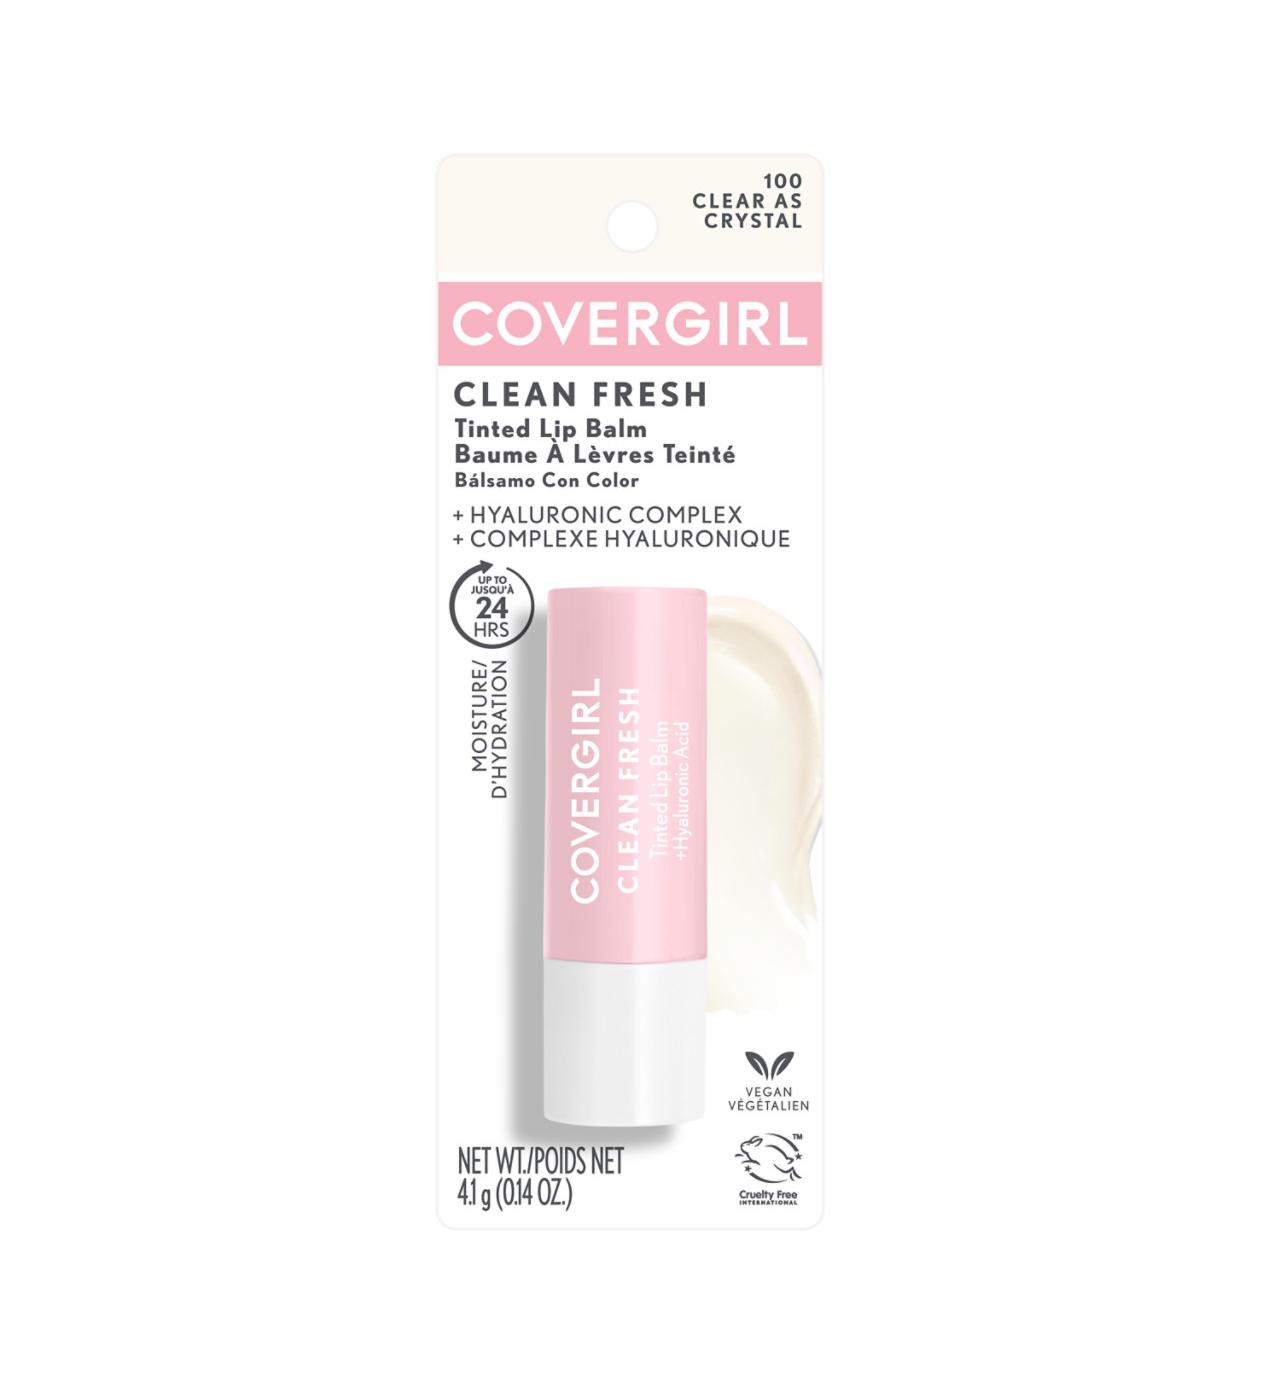 Covergirl Clean Fresh Tinted Lip Balm - Clear As Crystal; image 1 of 2